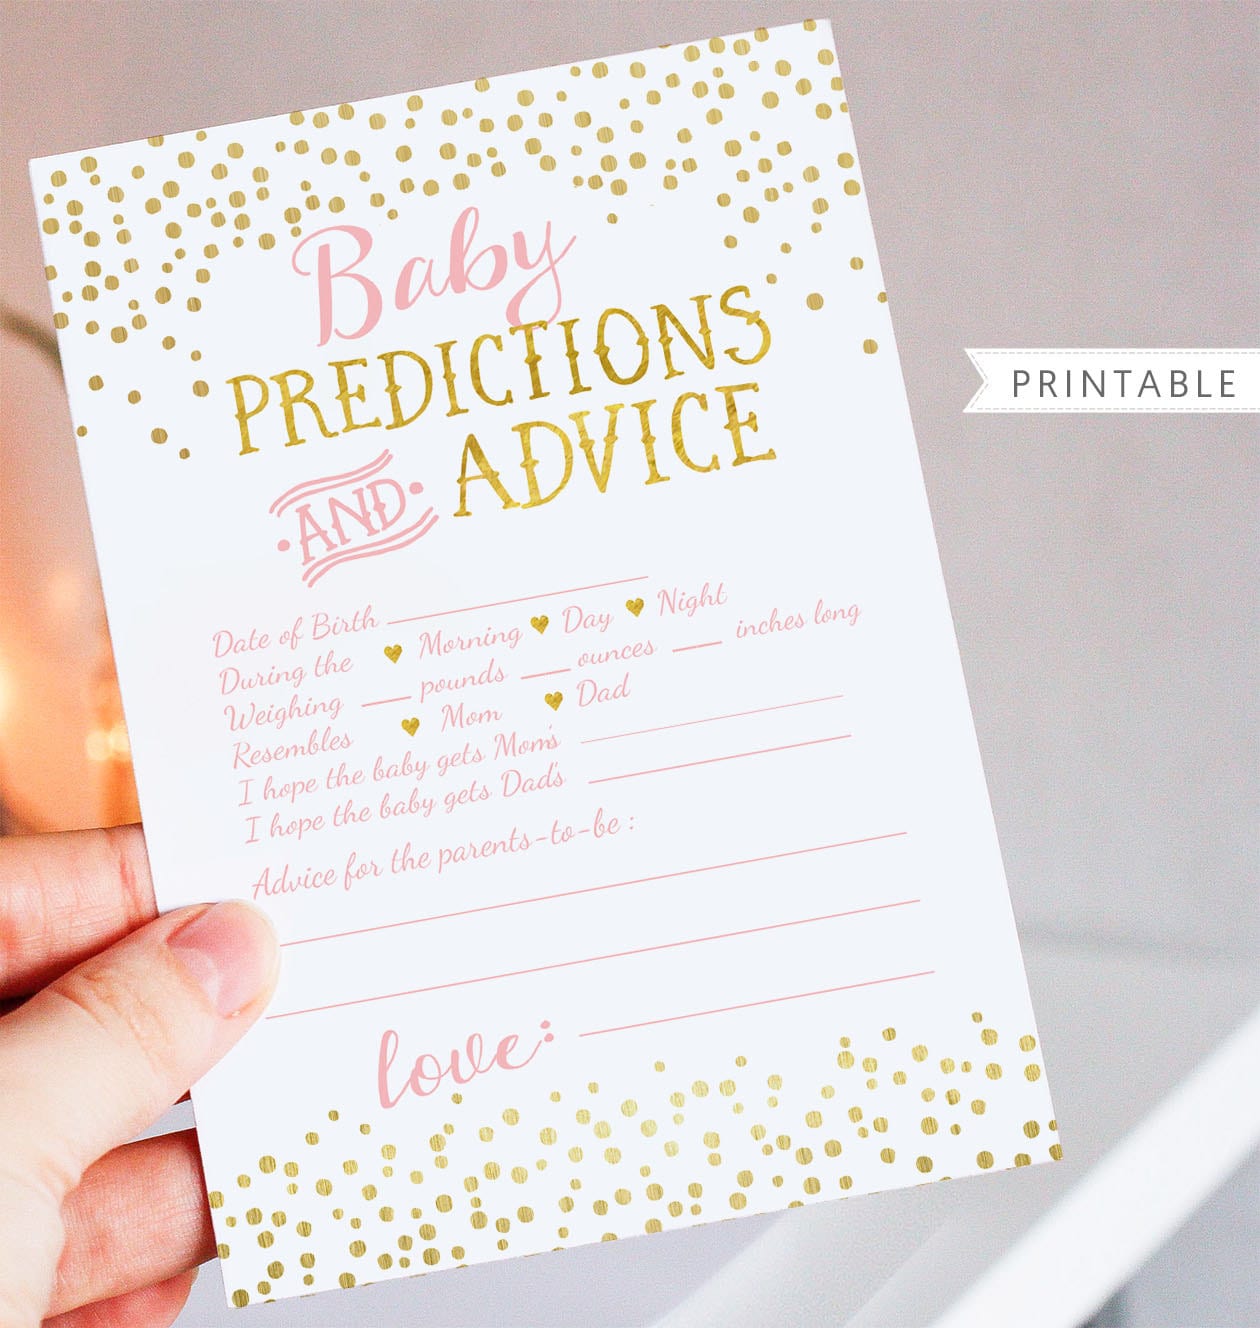 Baby Predictions and Advice Card Printable Blush Pink and